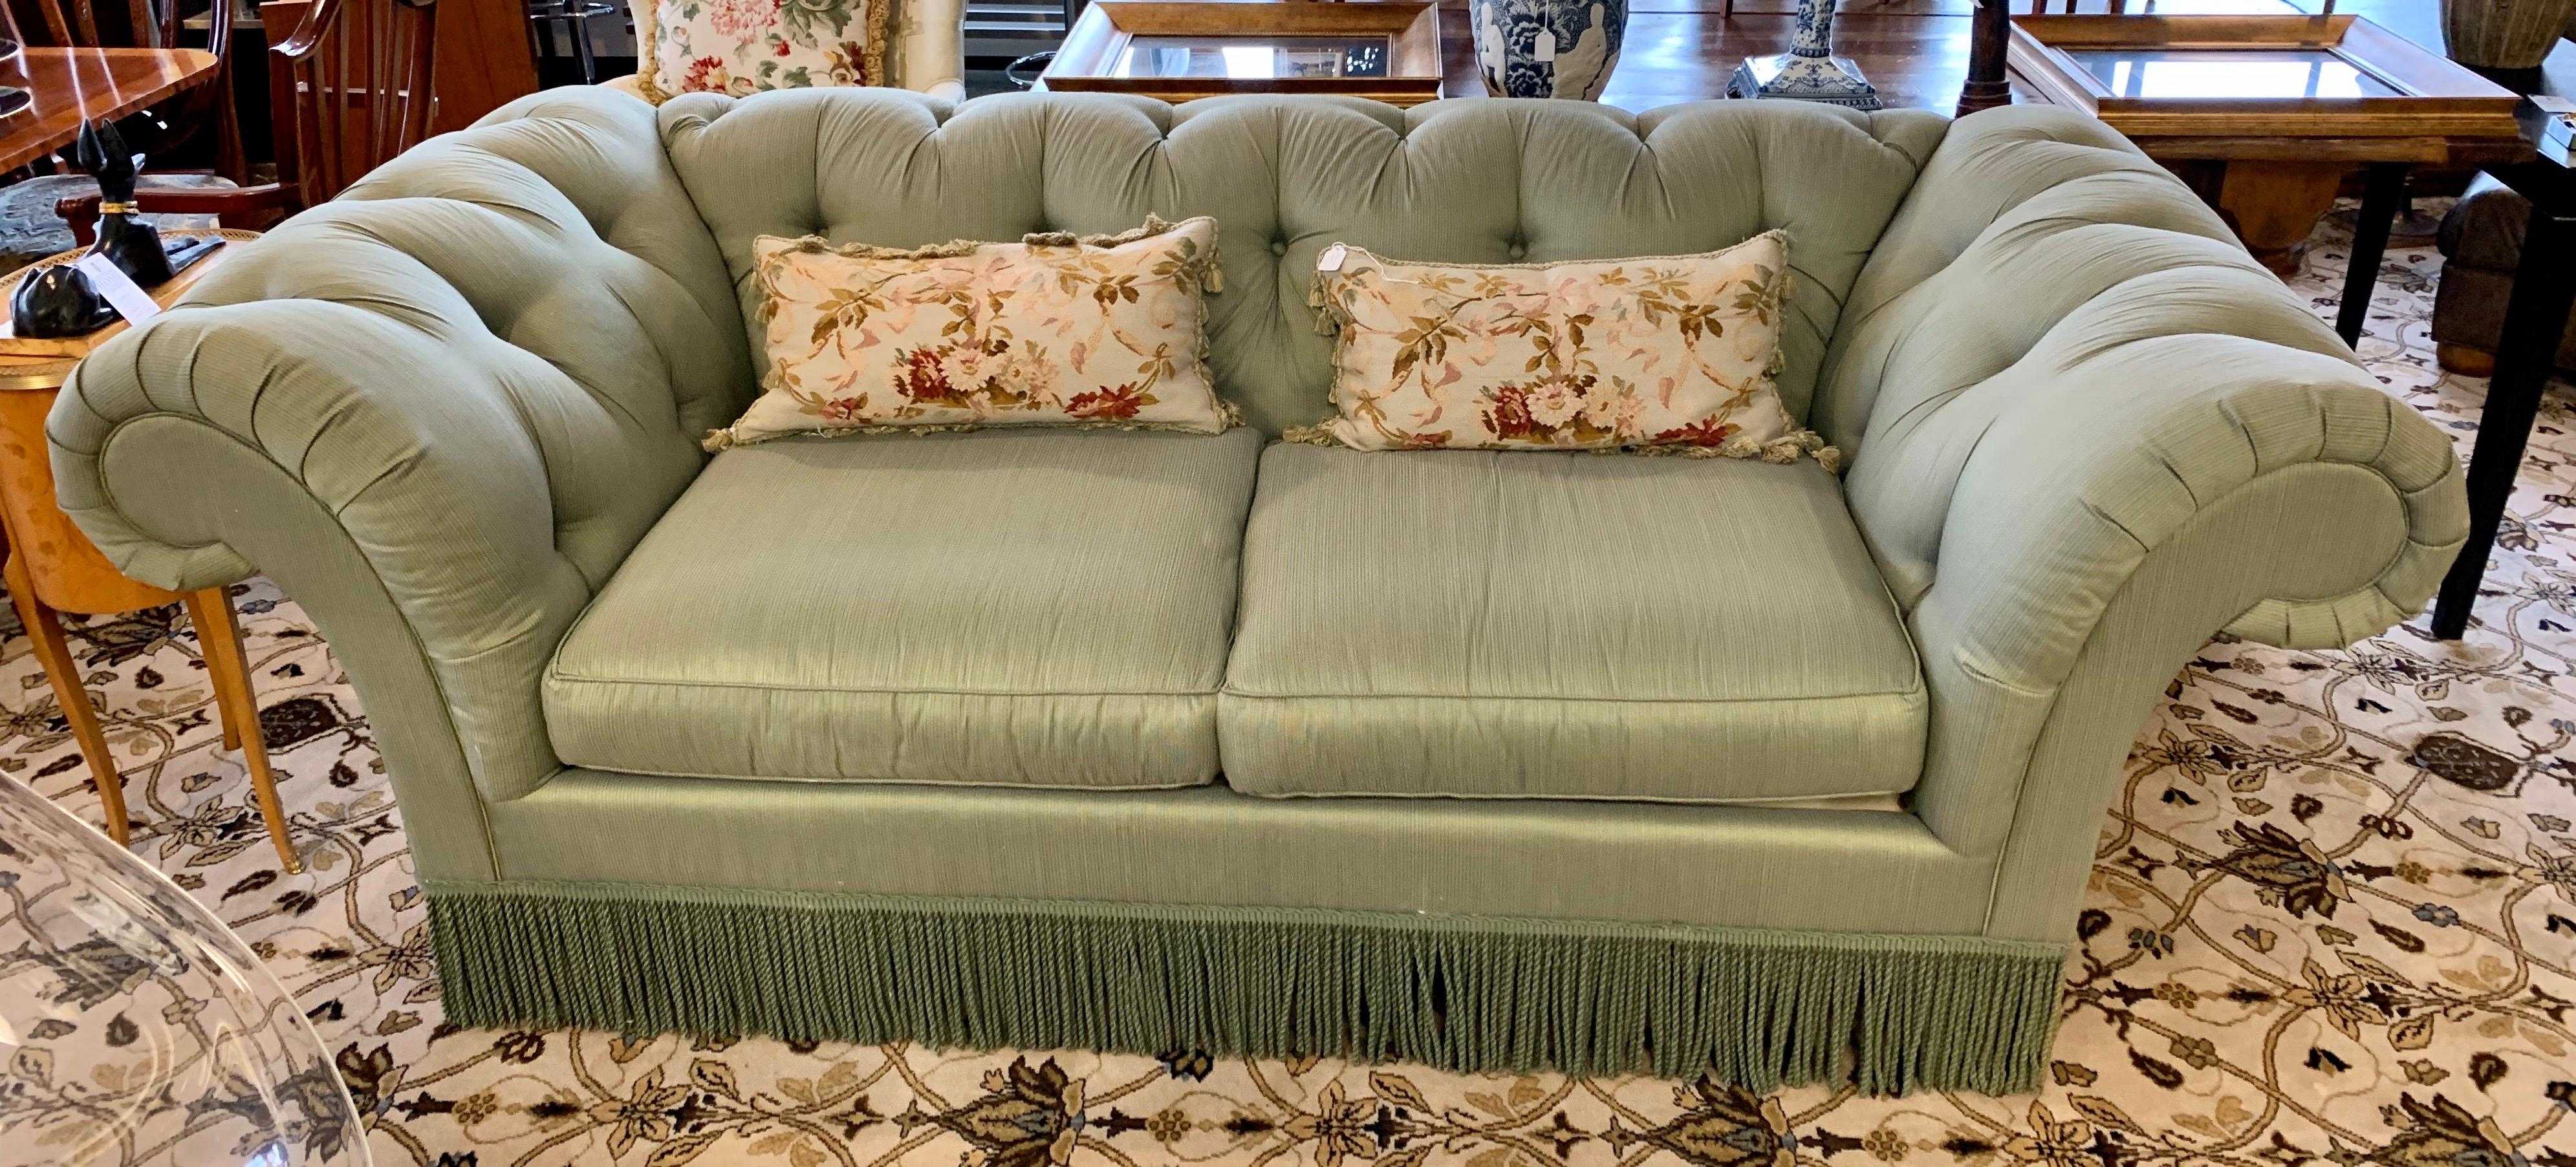 olive chesterfield sofa